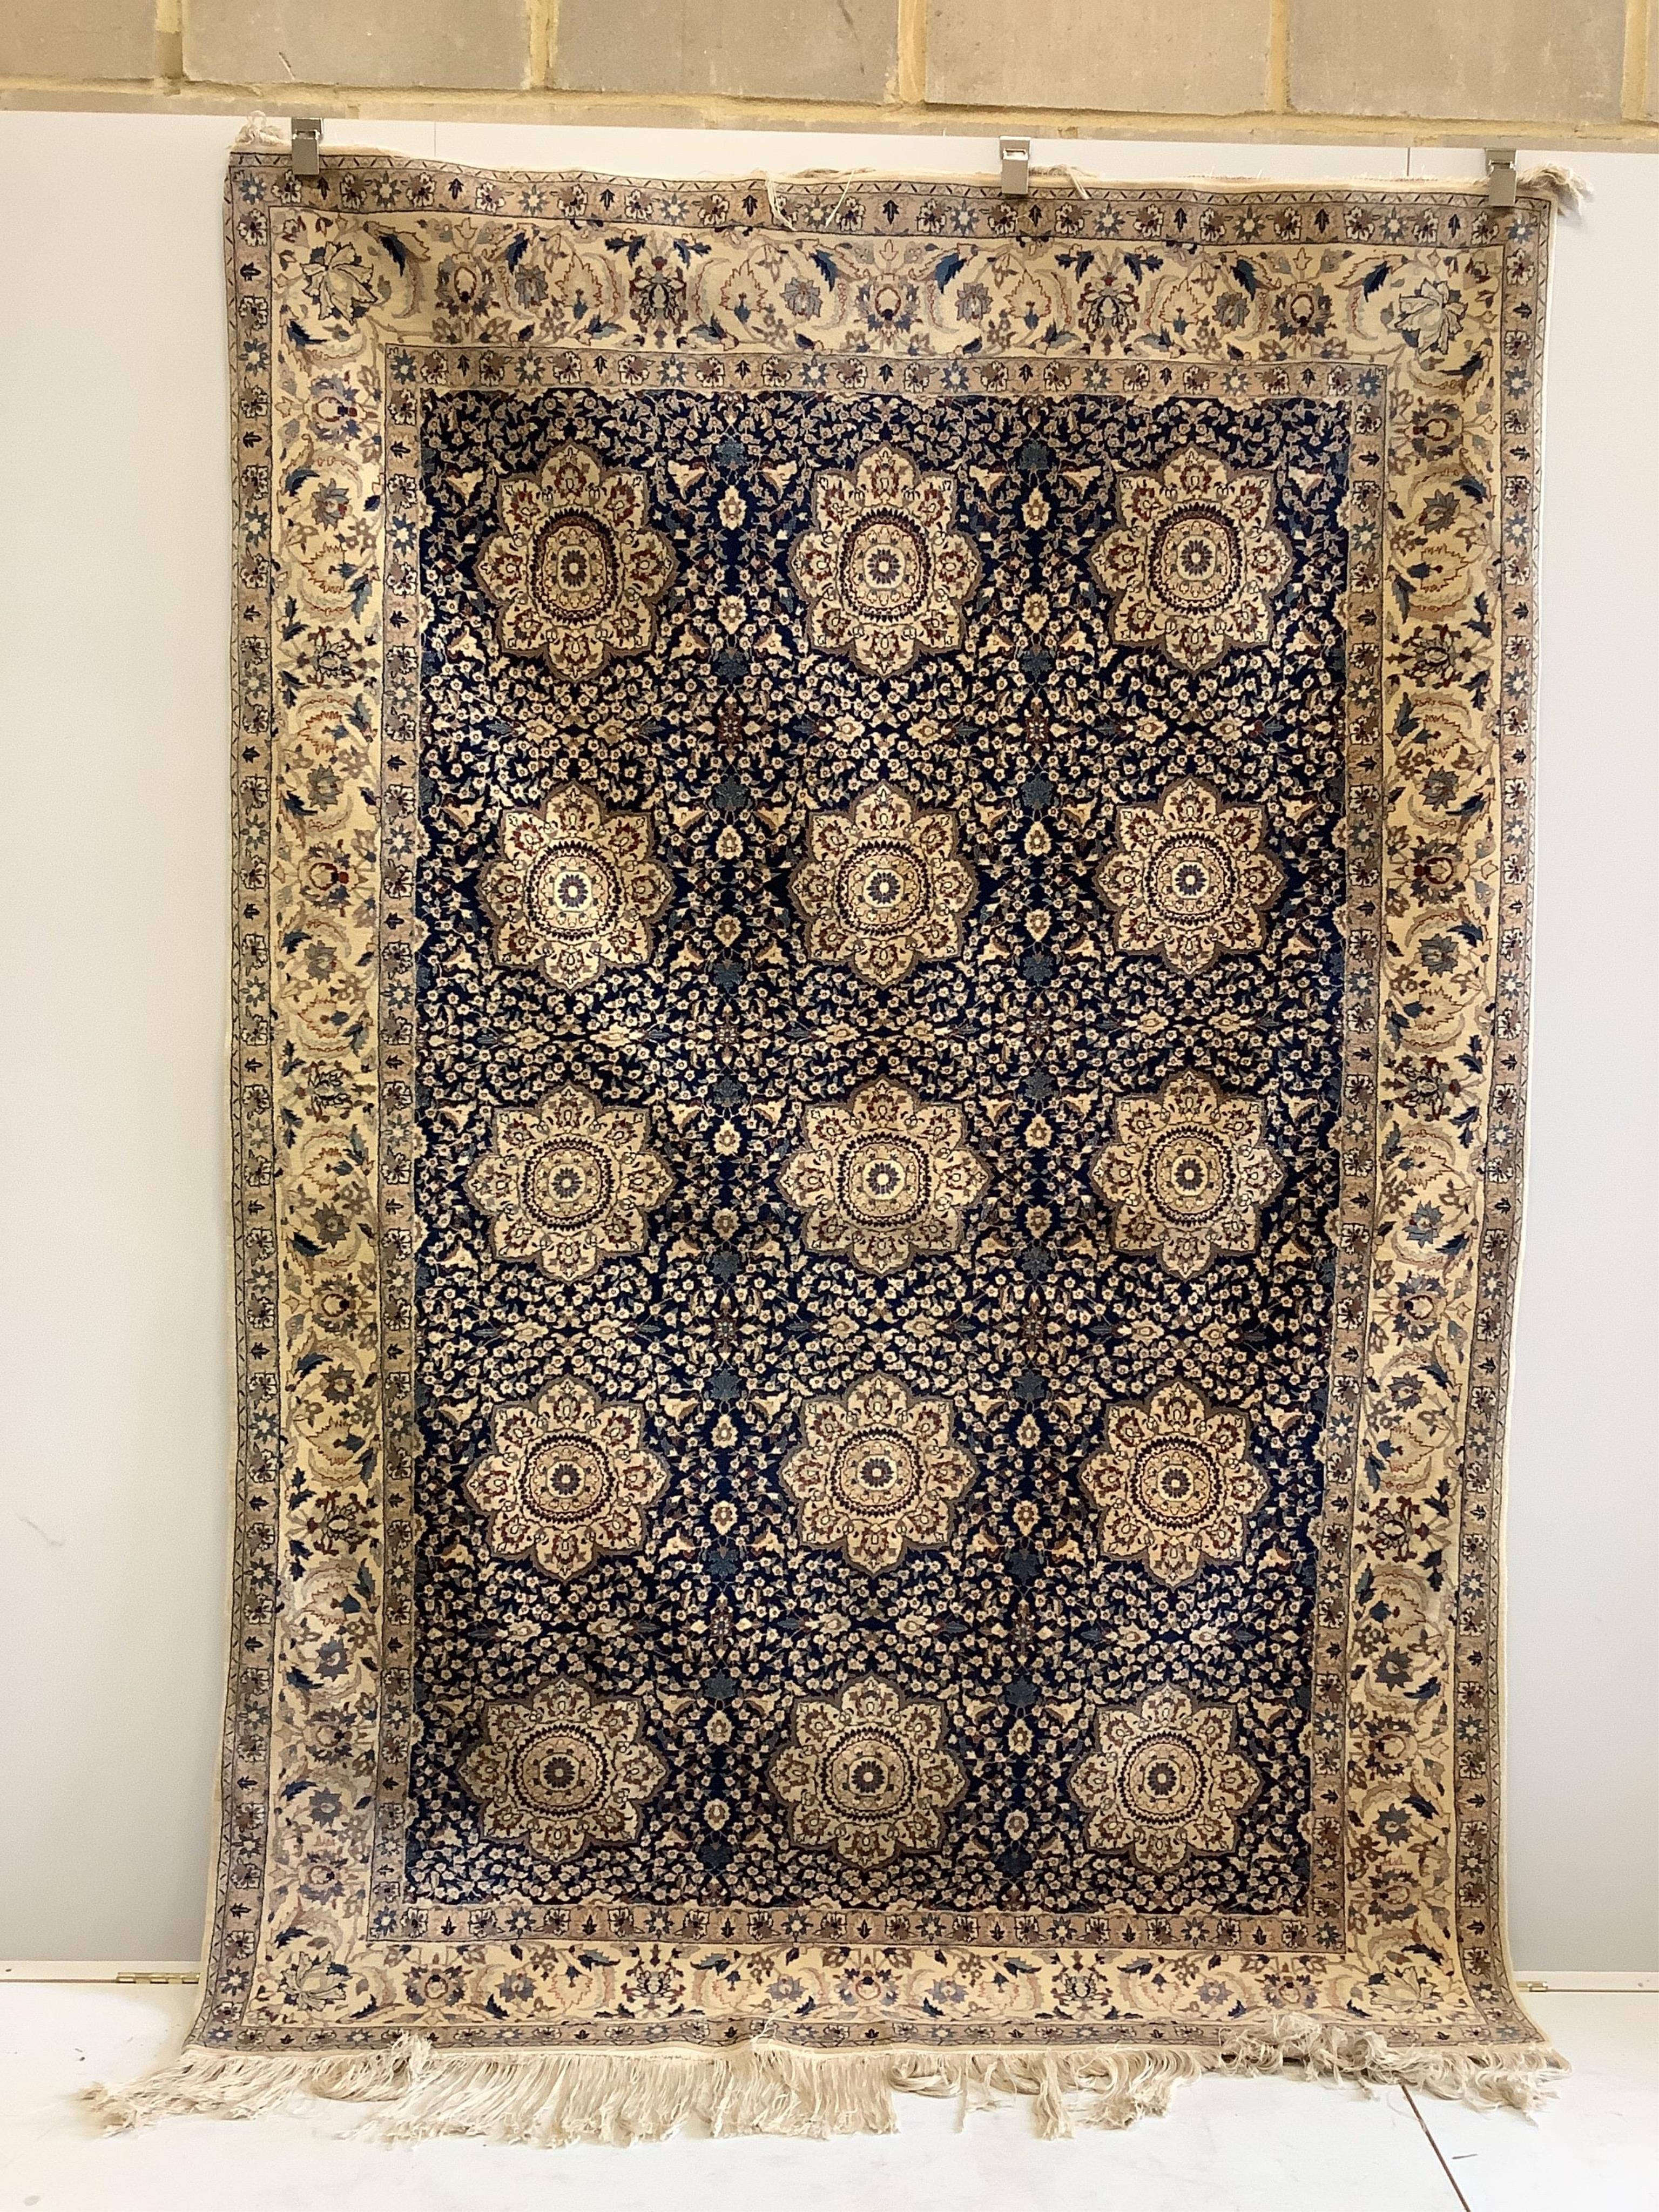 A North West Persian blue and ivory ground carpet with floral borders, 250 x 168cm. Condition - fair